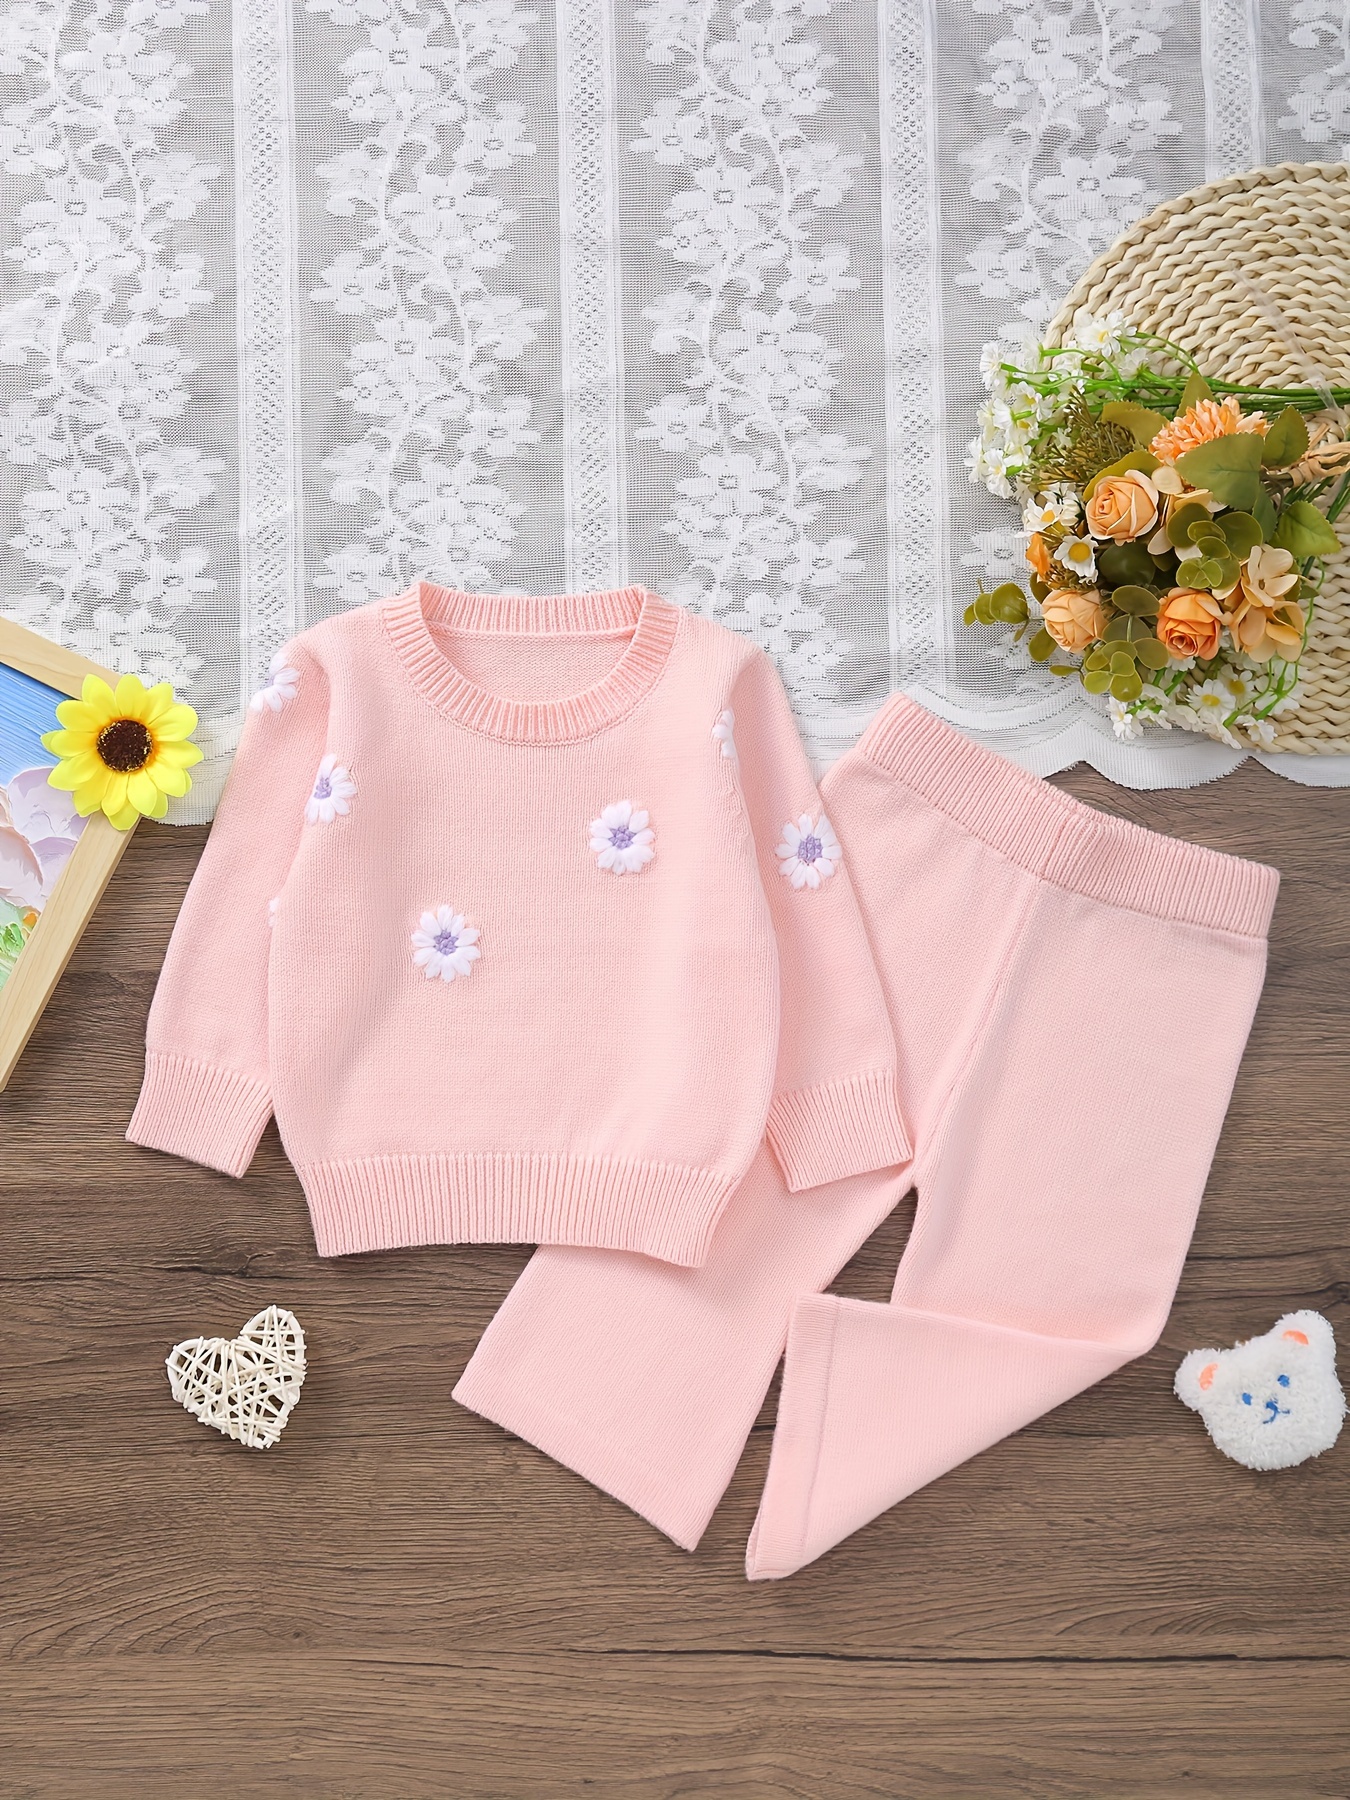 Baby Girl Outfits Long Sleeve T-Shirt Knit Ribbed Pants Set Fall Winter  Clothes